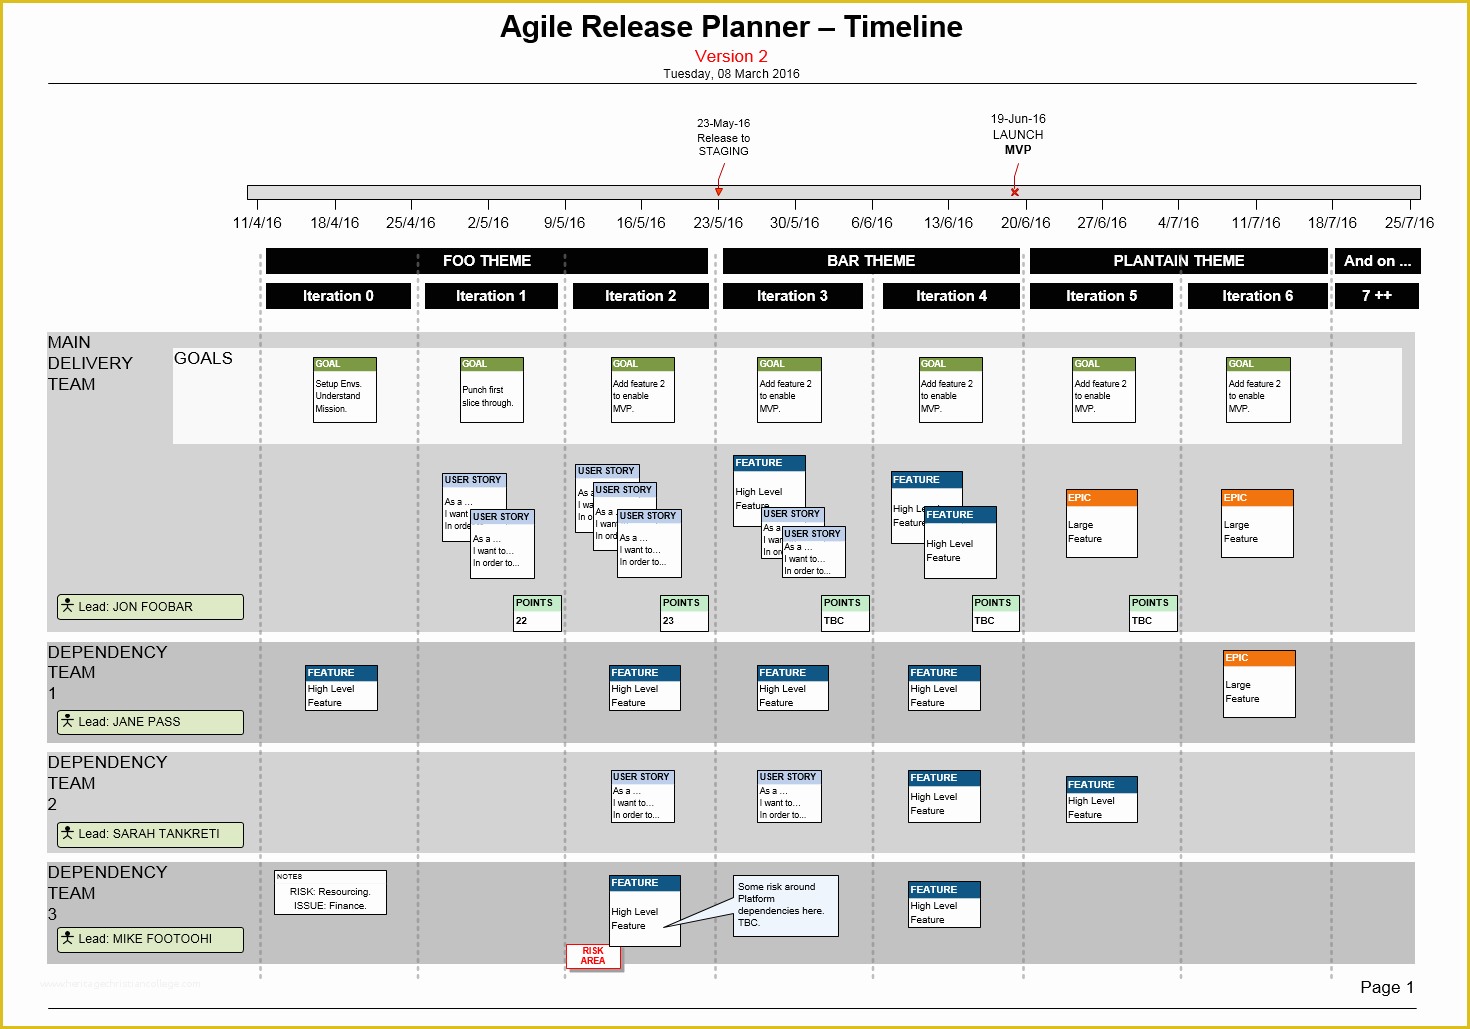 Agile Project Plan Template Excel Free Download Of Visio Agile Release Plan for Scrum Teams Story Map & Mvp